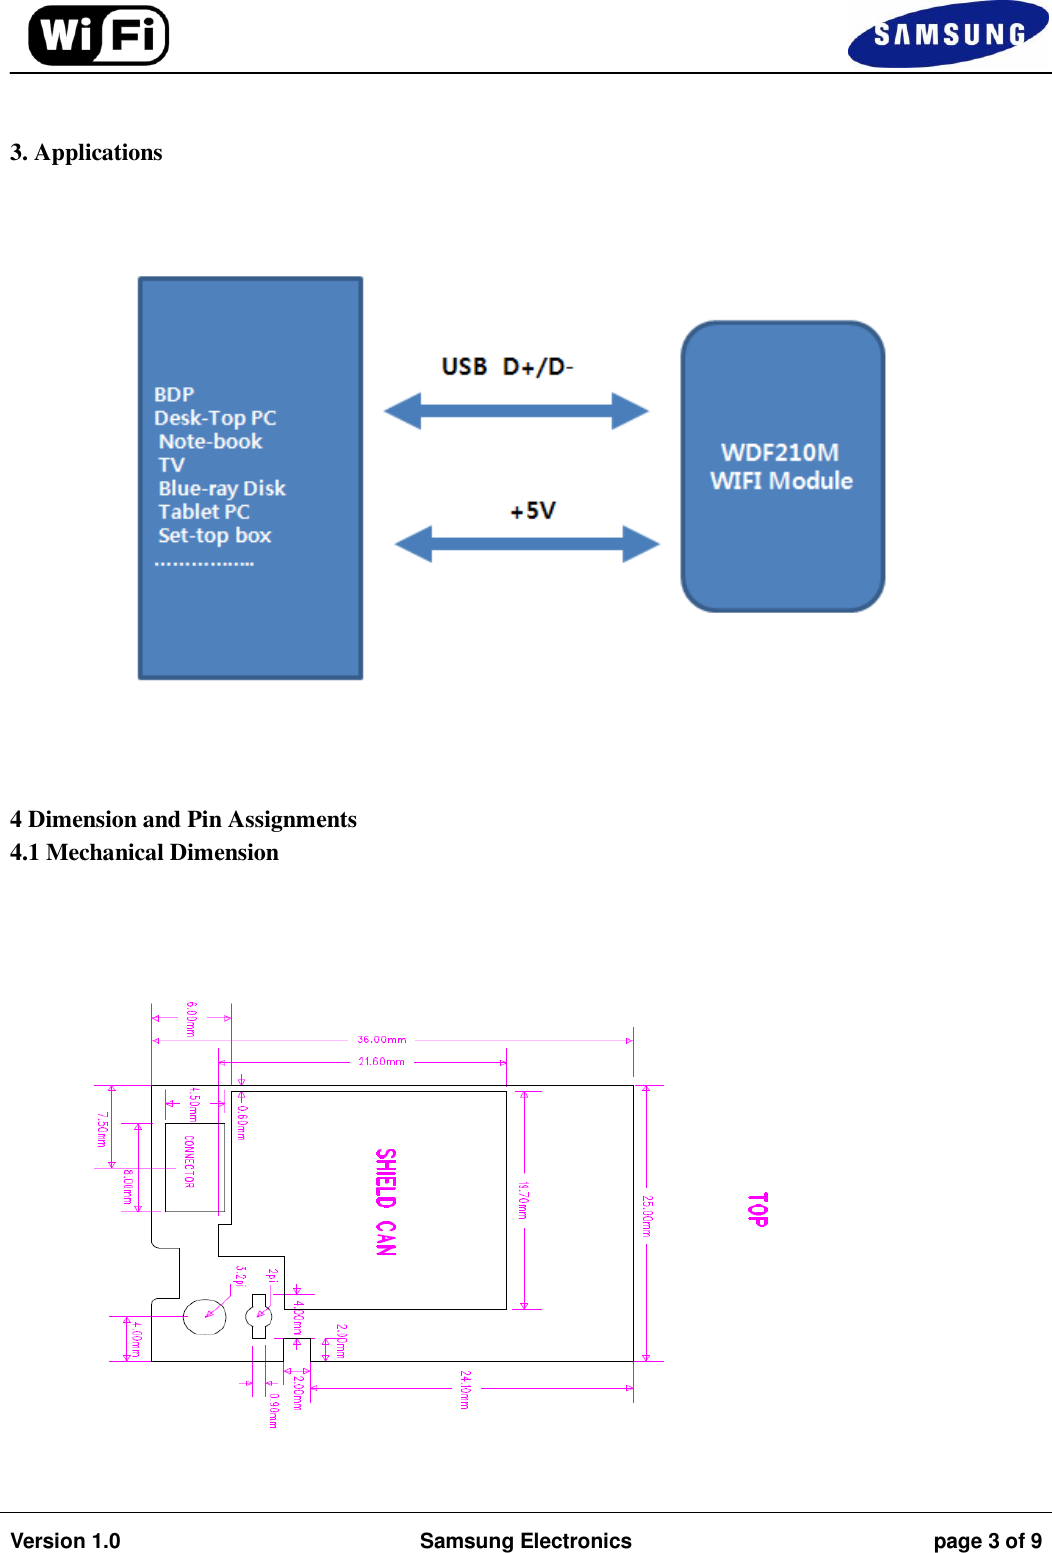                                                                                                                                         Version 1.0 Samsung Electronics page 3 of 9      3. Applications       4 Dimension and Pin Assignments 4.1 Mechanical Dimension                    